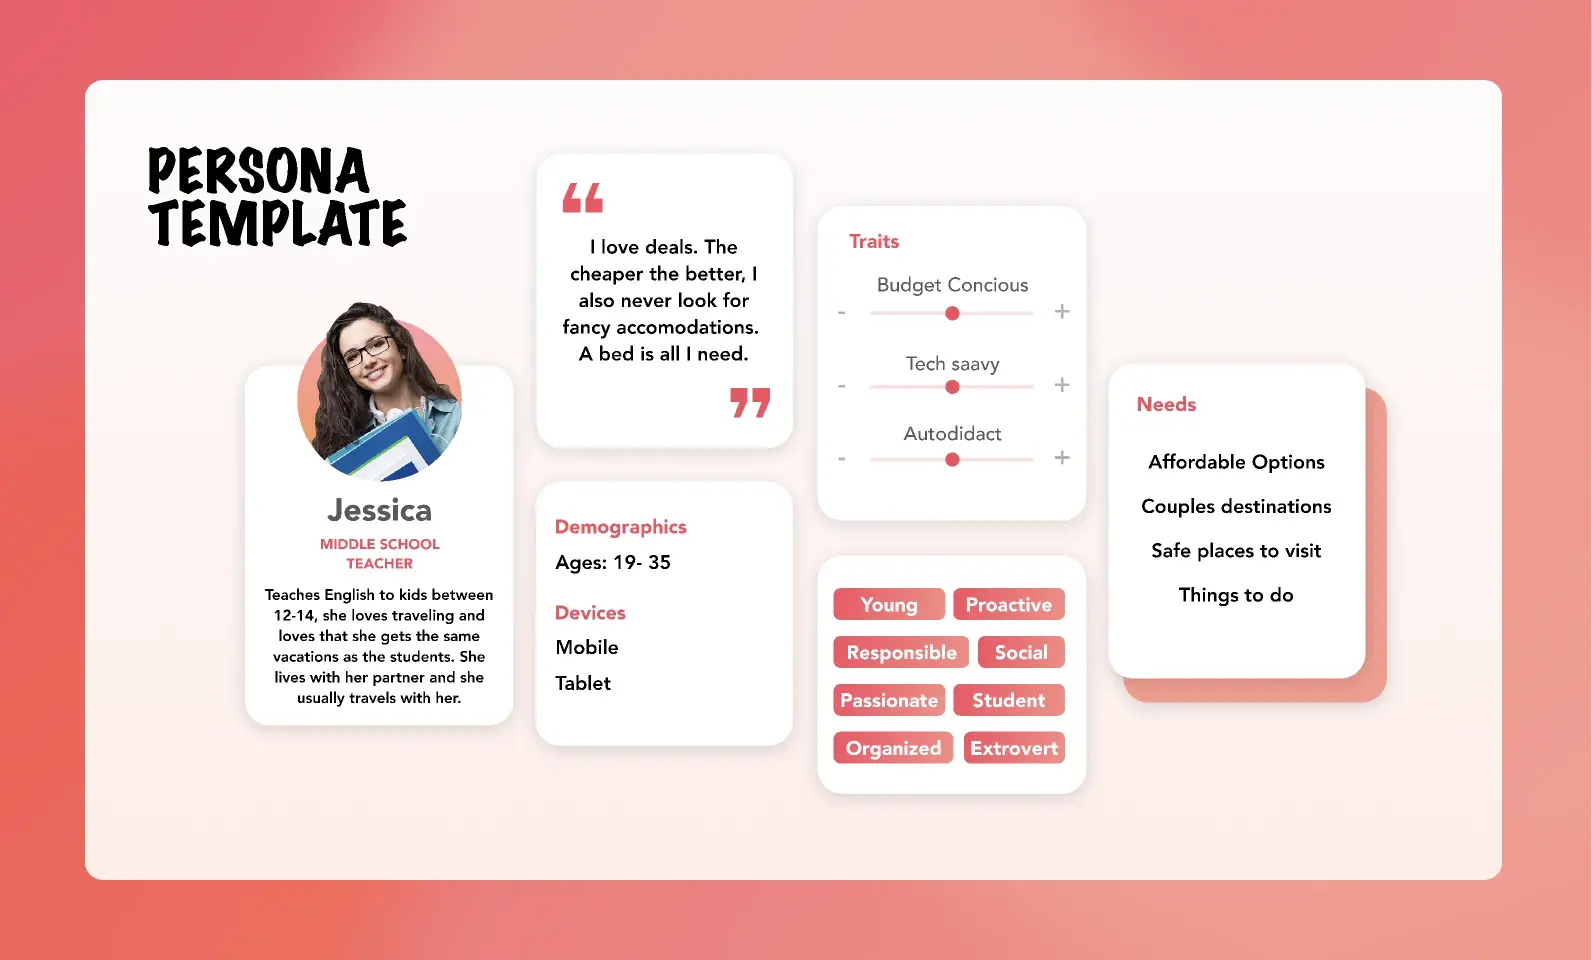 Blogduwebdesign ressources web templates user persona by lily bather